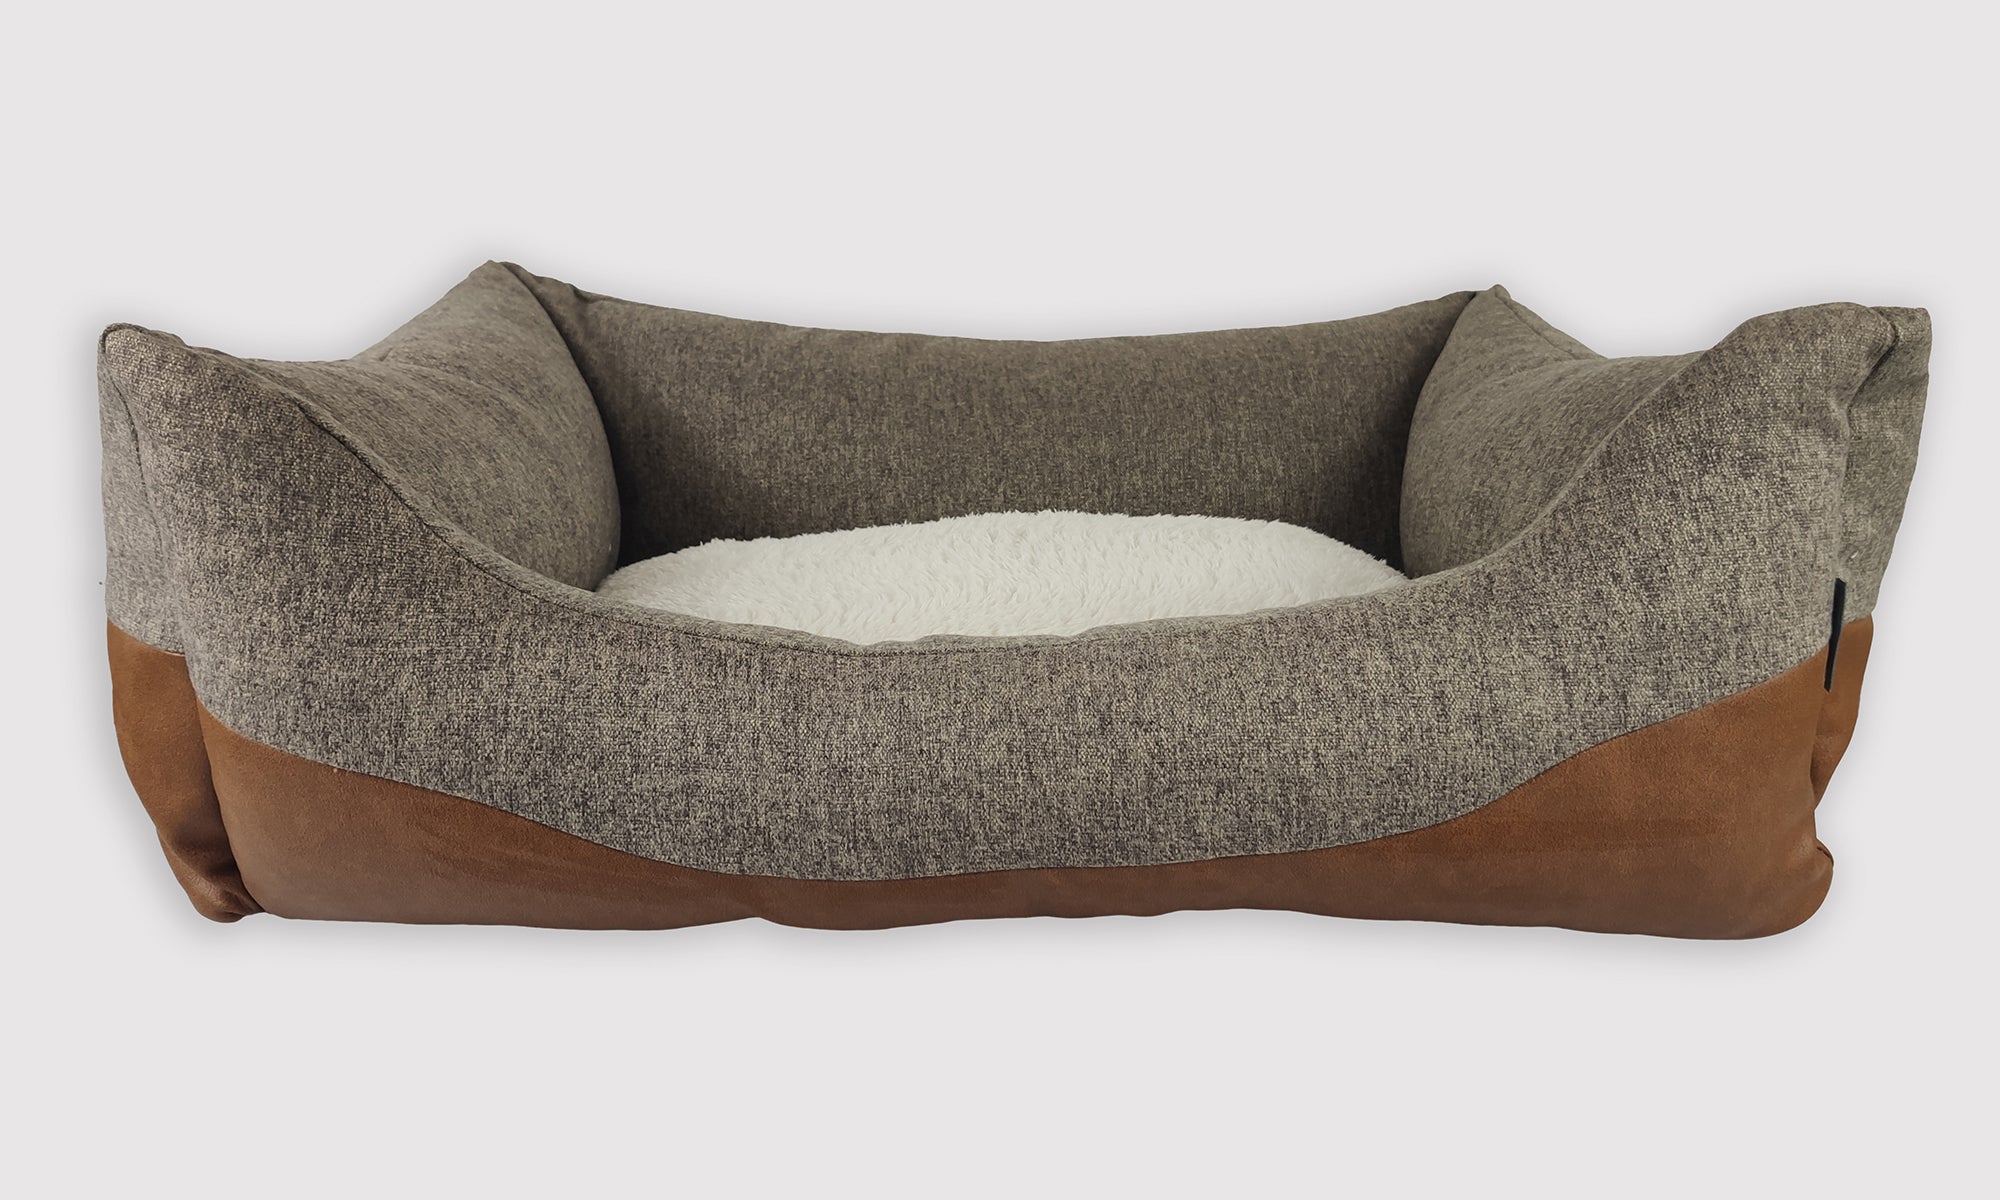 Unleashed JMT-1010 Chill Gusset Bed For Dog (Cream Plush, 48x30) – inovago